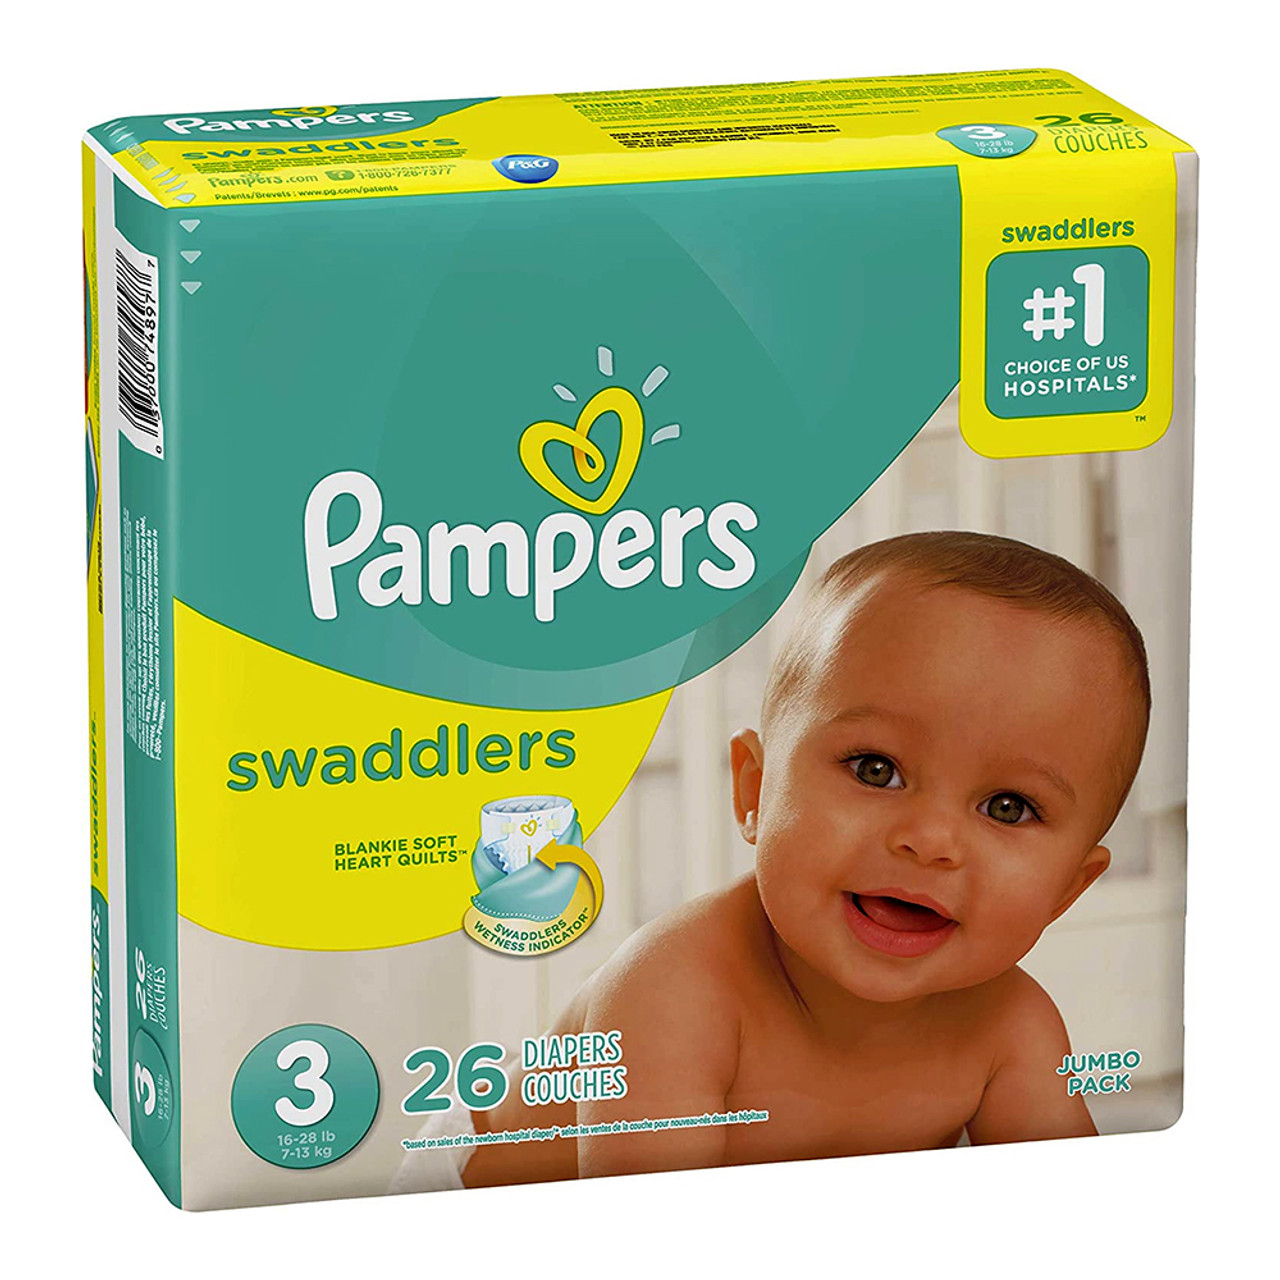 Pampers Swaddlers Size 7 Diapers Sample of 2 (prints vary)